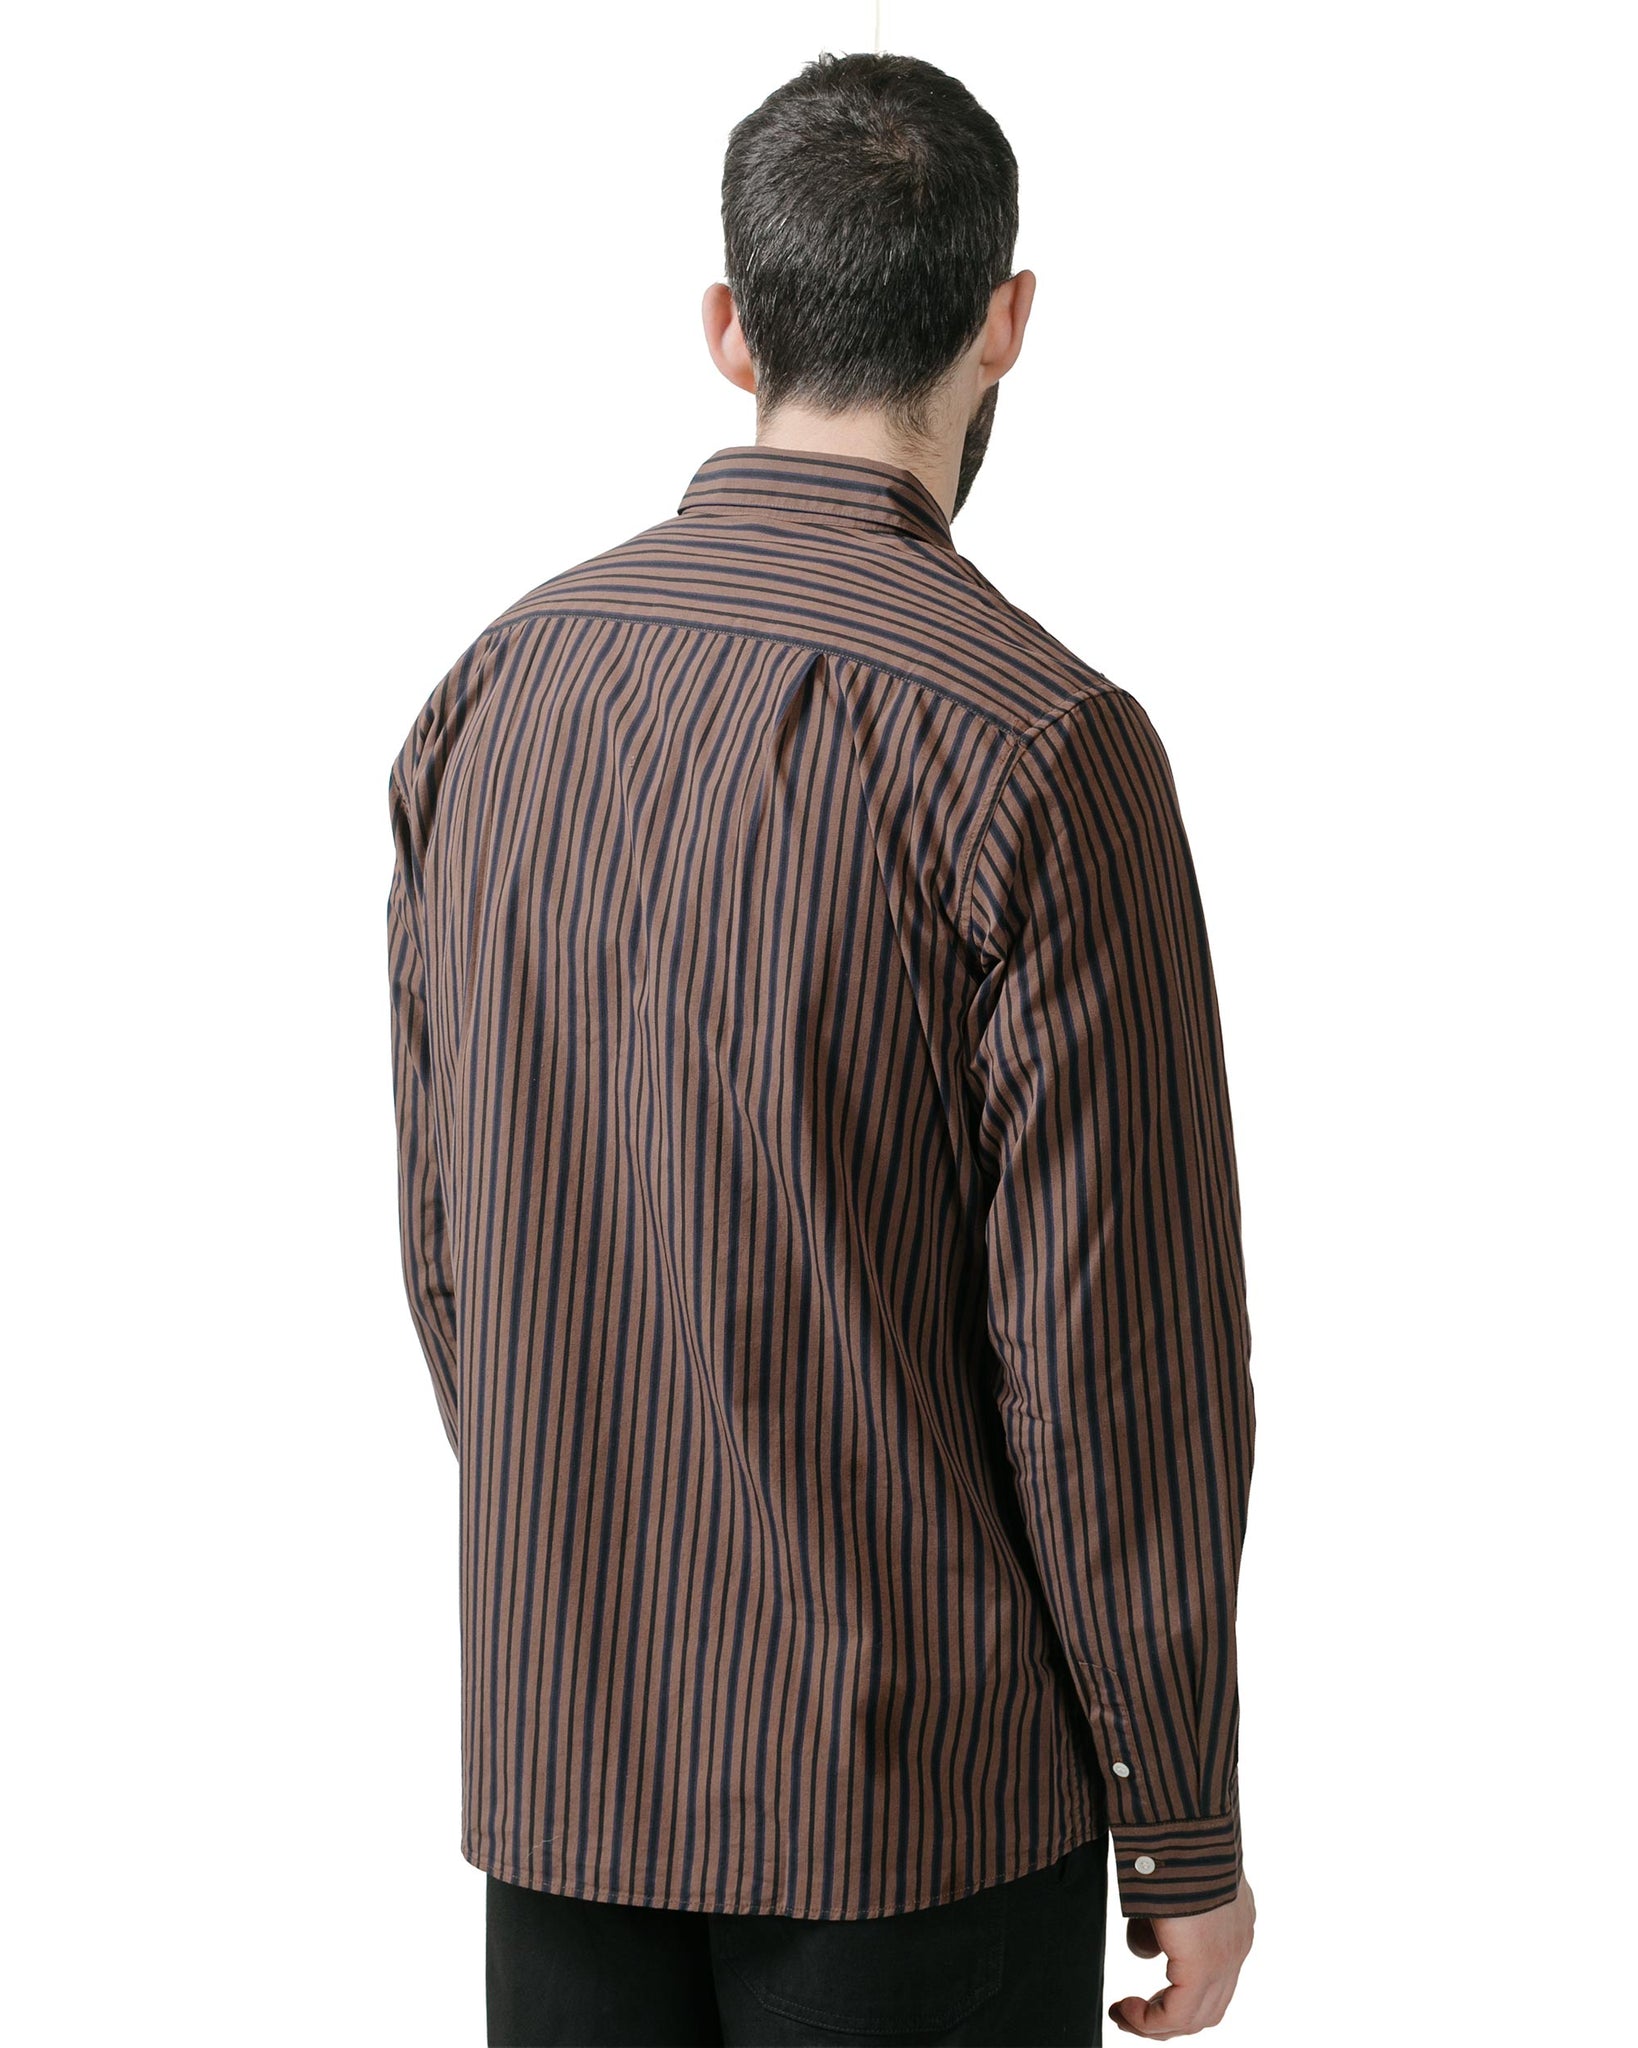 Another Aspect Another Shirt 3.0 Brown/Black Stripe model back